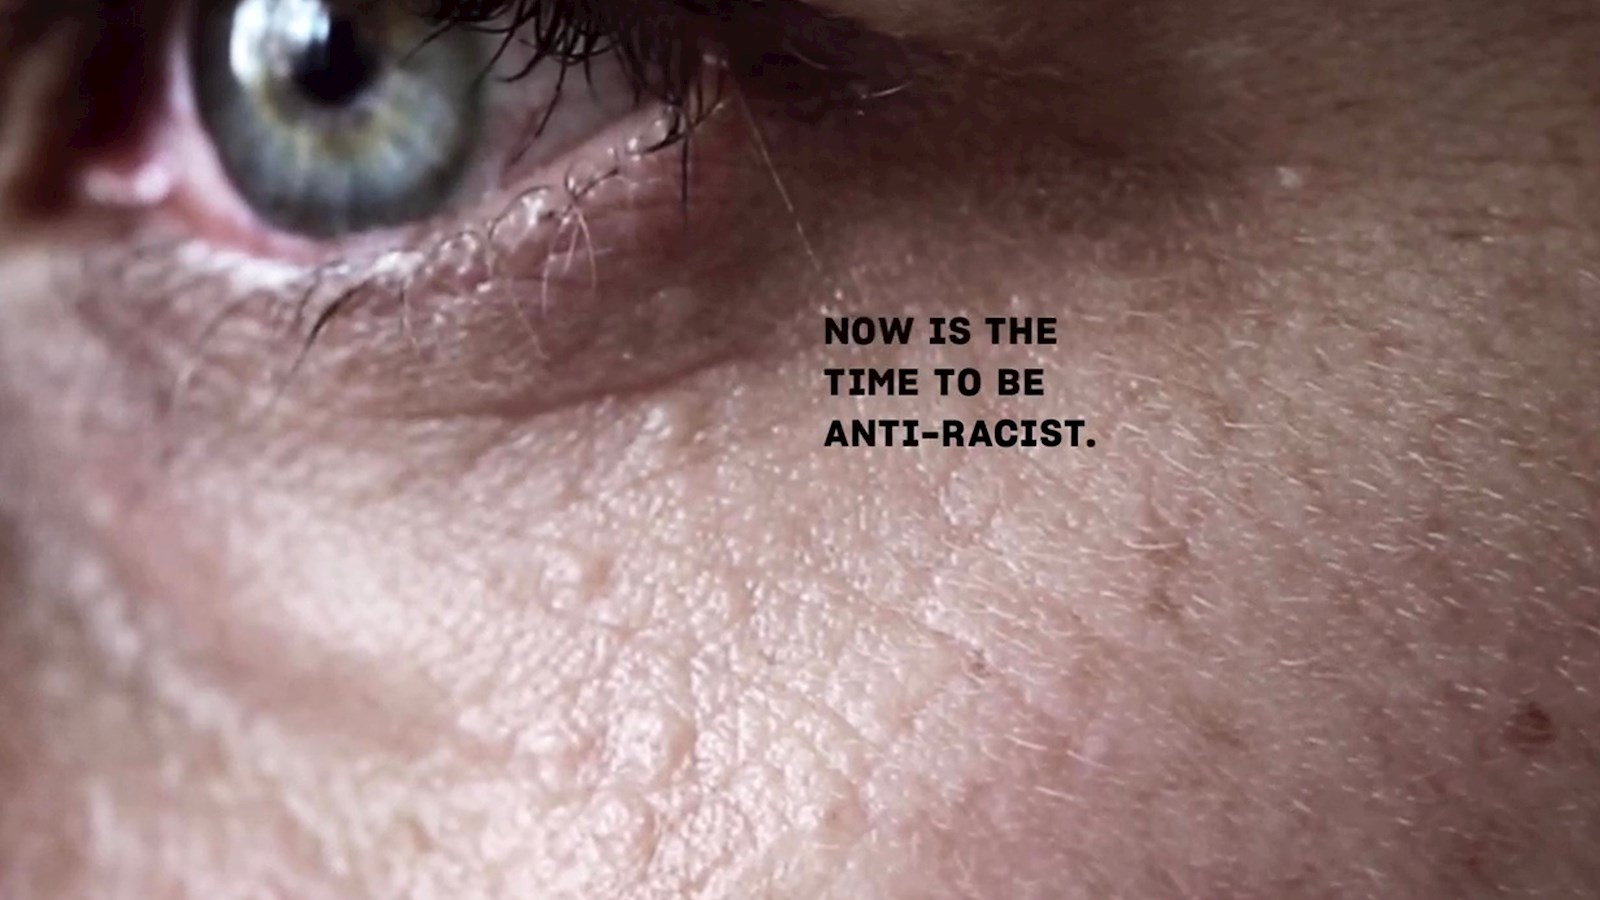 Image of white man's face with words "Now is the time to be anti-racist"